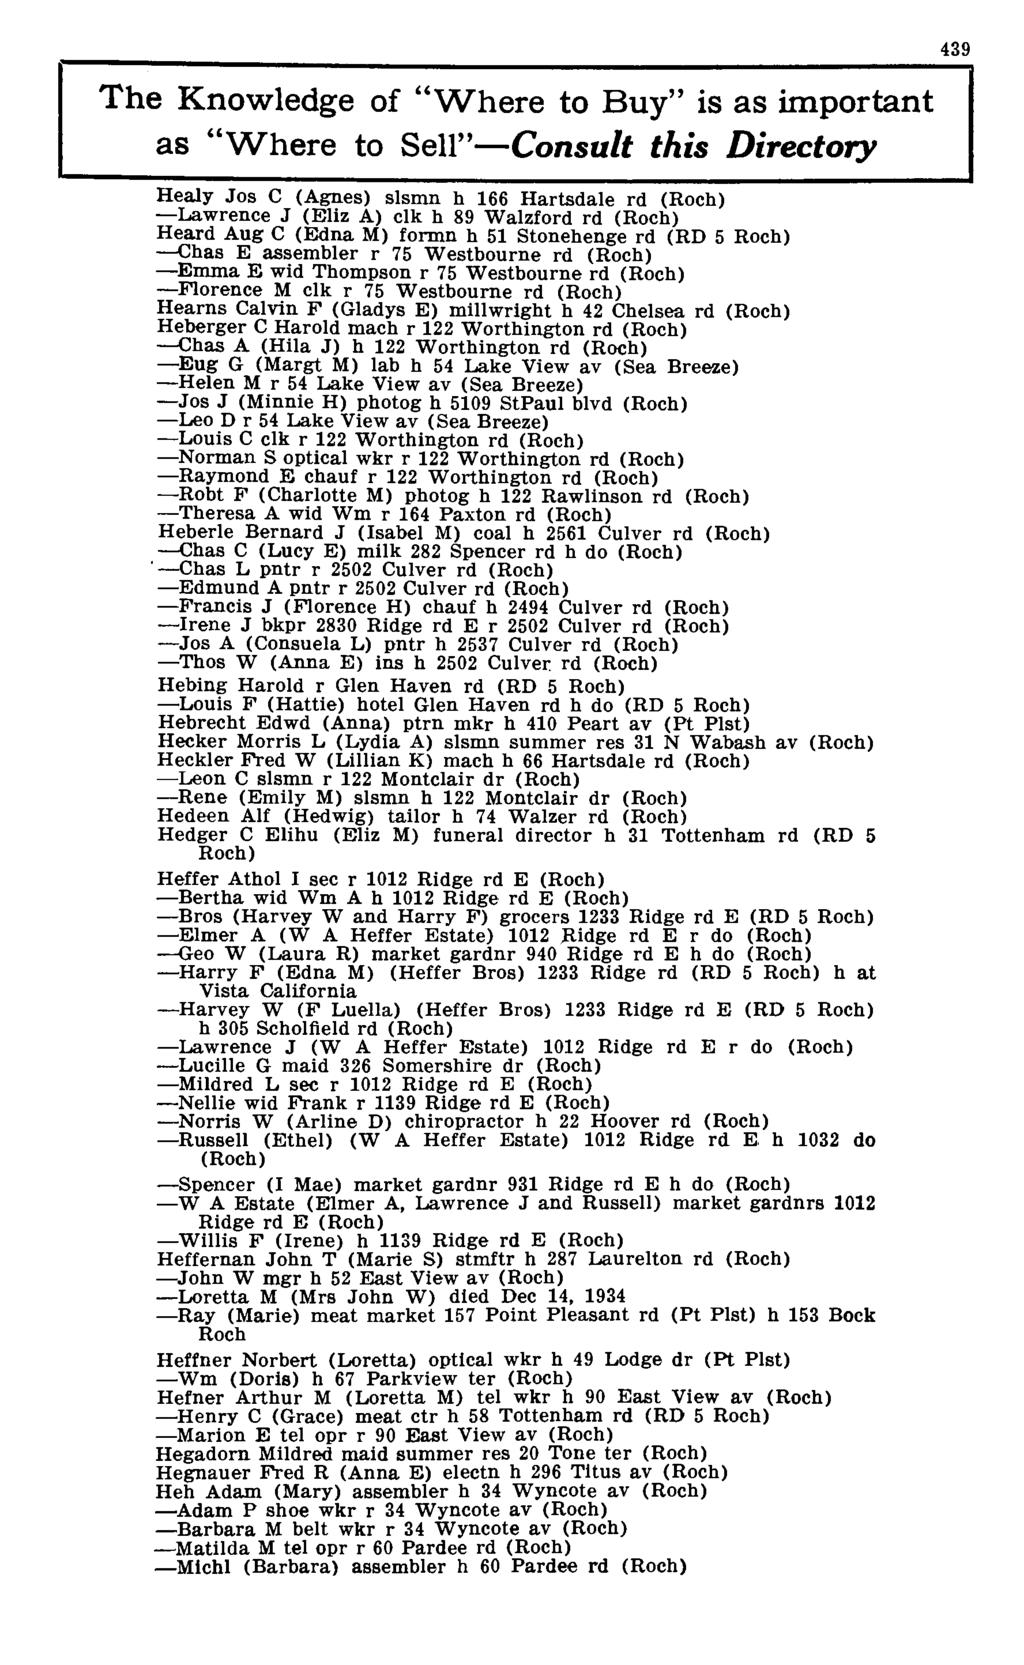 ' Central Library of Rochester and Monroe County Miscellaneous Directories 439 The Knowledge of "Where to Buy" is as important as "Where to Sell" Consult this Directory Healy Jos C (Agnes) slsmn h